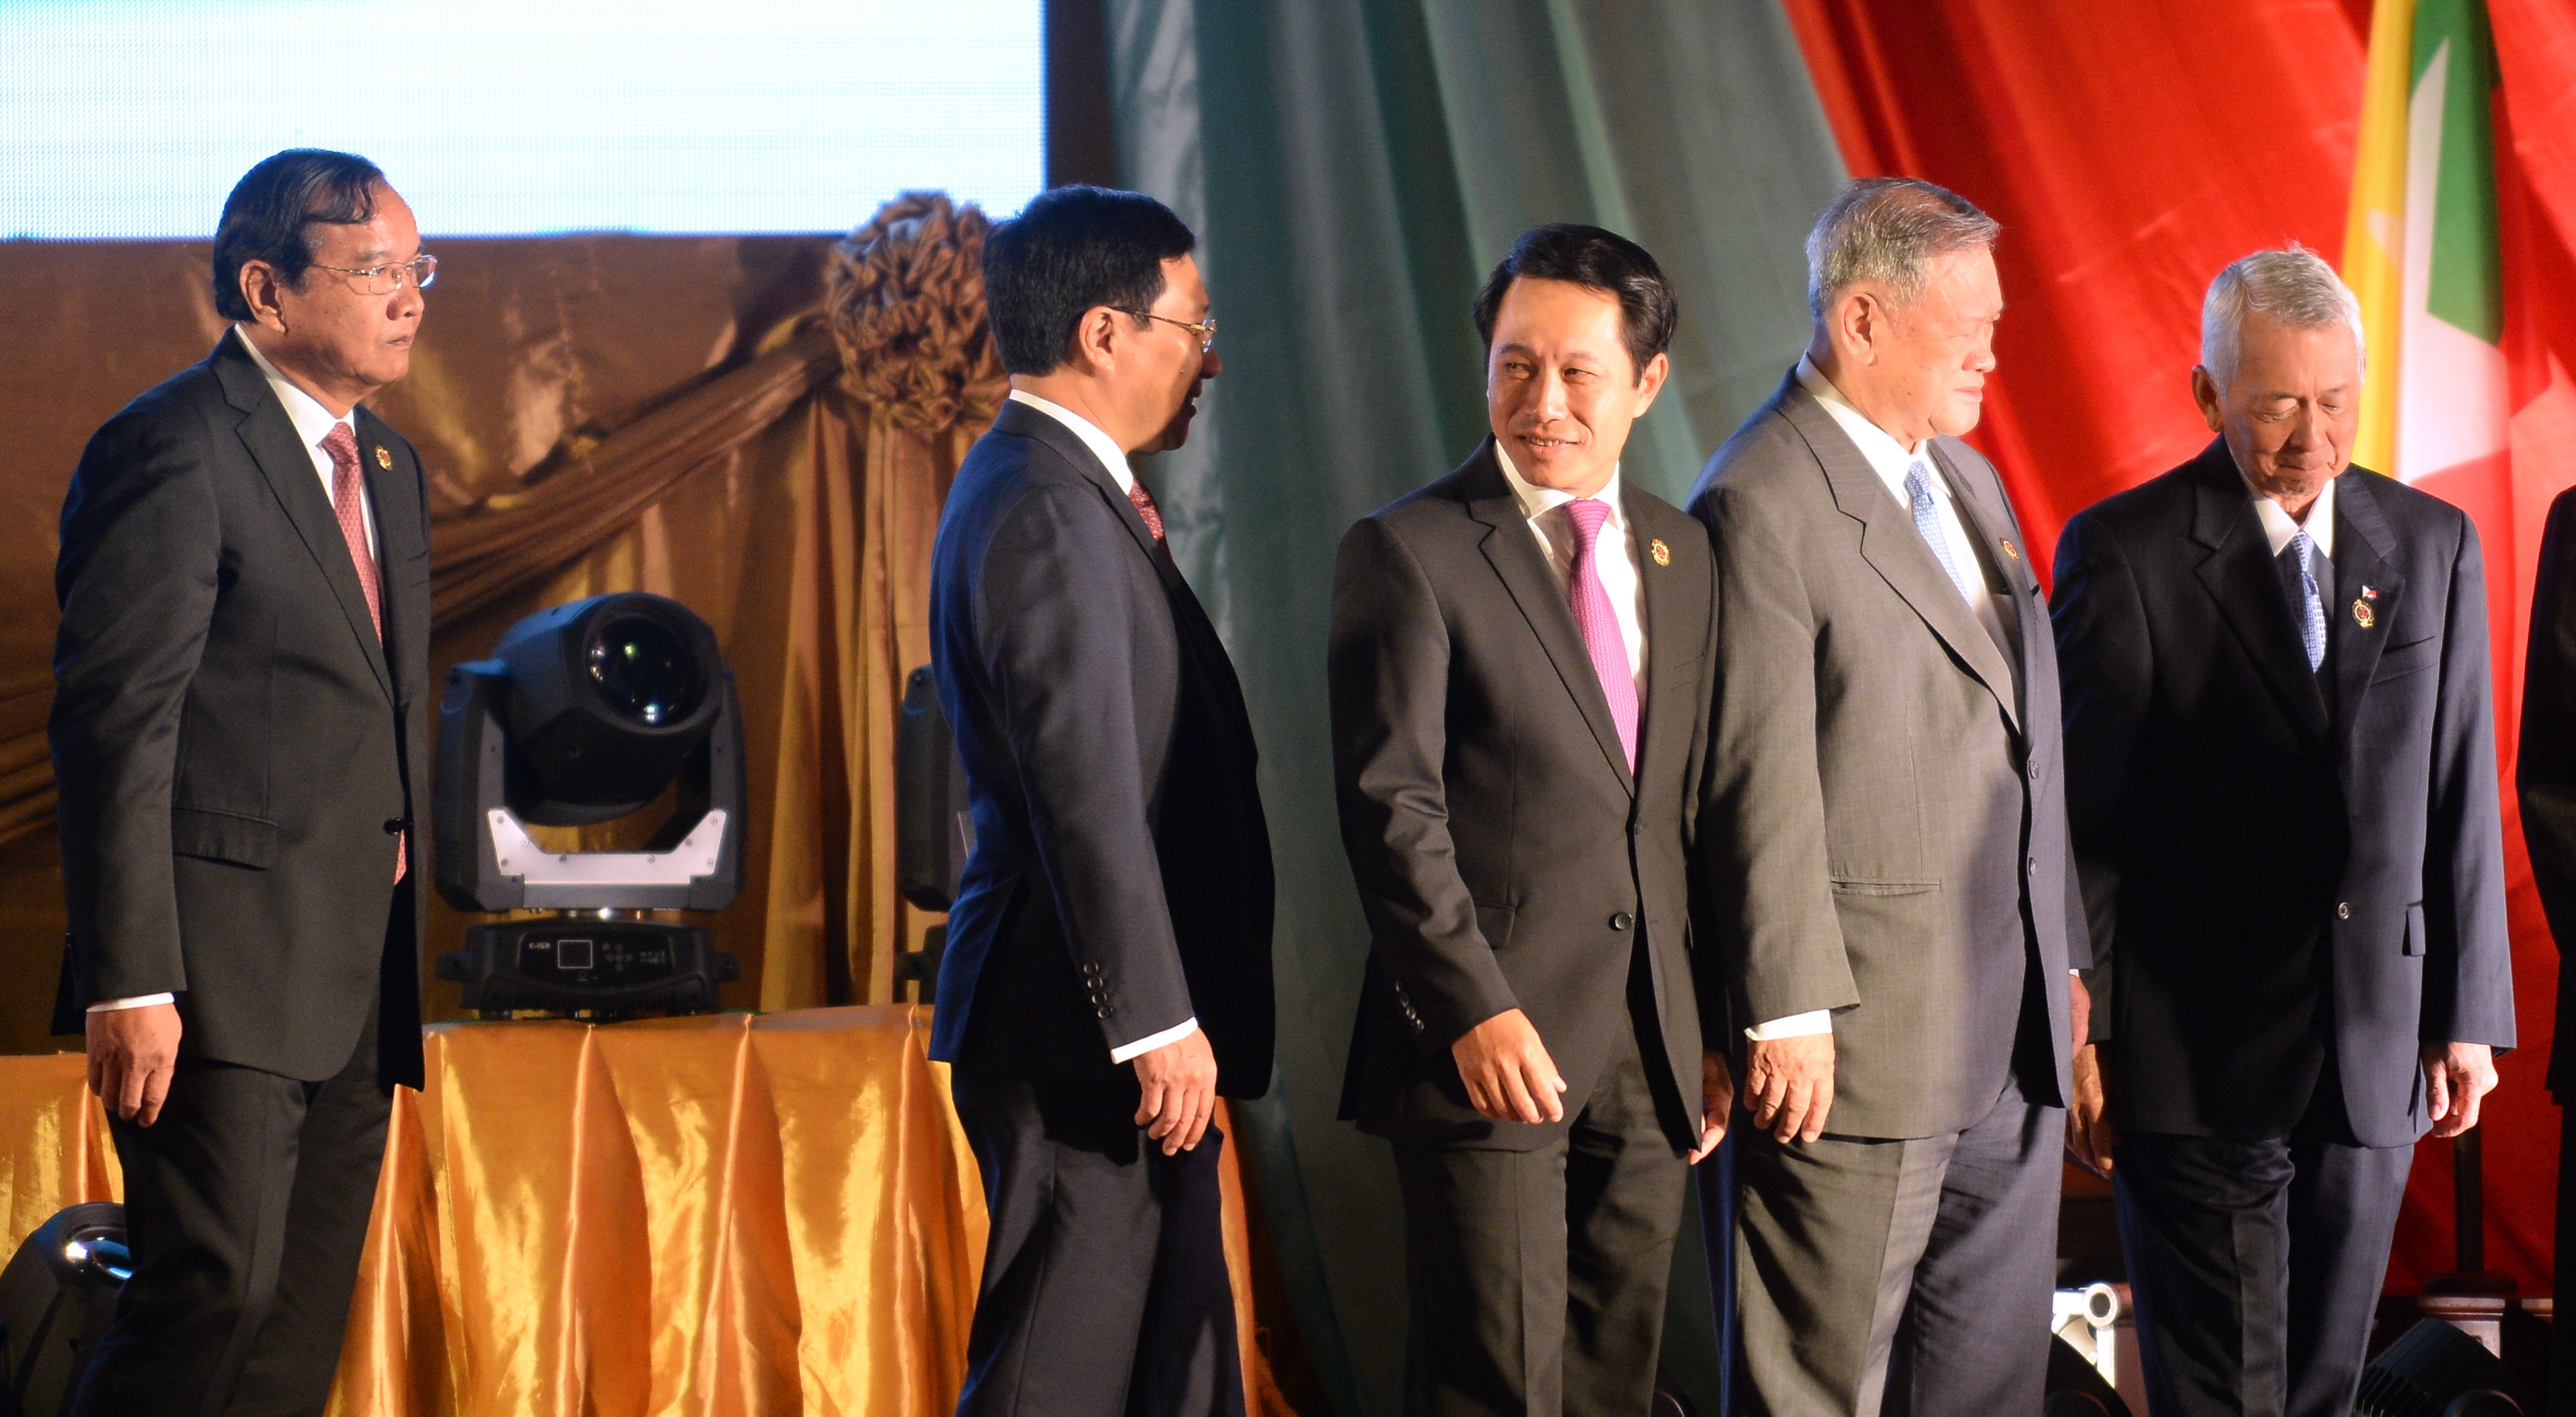 (L-R) Cambodia's Foreign Minister Prak Sokhonn, Vietnam's Foreign Minister Pham Binh Minh, Laos' Foreign Minister Saleumxay Kommasith, Brunei's Foreign Minister Dato Lim Jock Seng and Philippines' Foreign Minister Perfecto Yasay walk down from the podium after a group photo session during the opening ceremony of the Association of Southeast Asian Nations (ASEAN)'s 49th annual ministerial meeting in Vientiane on July 24, 2016. Southeast Asian foreign ministers were to hold crunch talks in communist Laos on July 24 at a summit already overshadowed by infighting over Beijing's sabre rattling in the South China Sea. / AFP PHOTO / HOANG DINH NAM